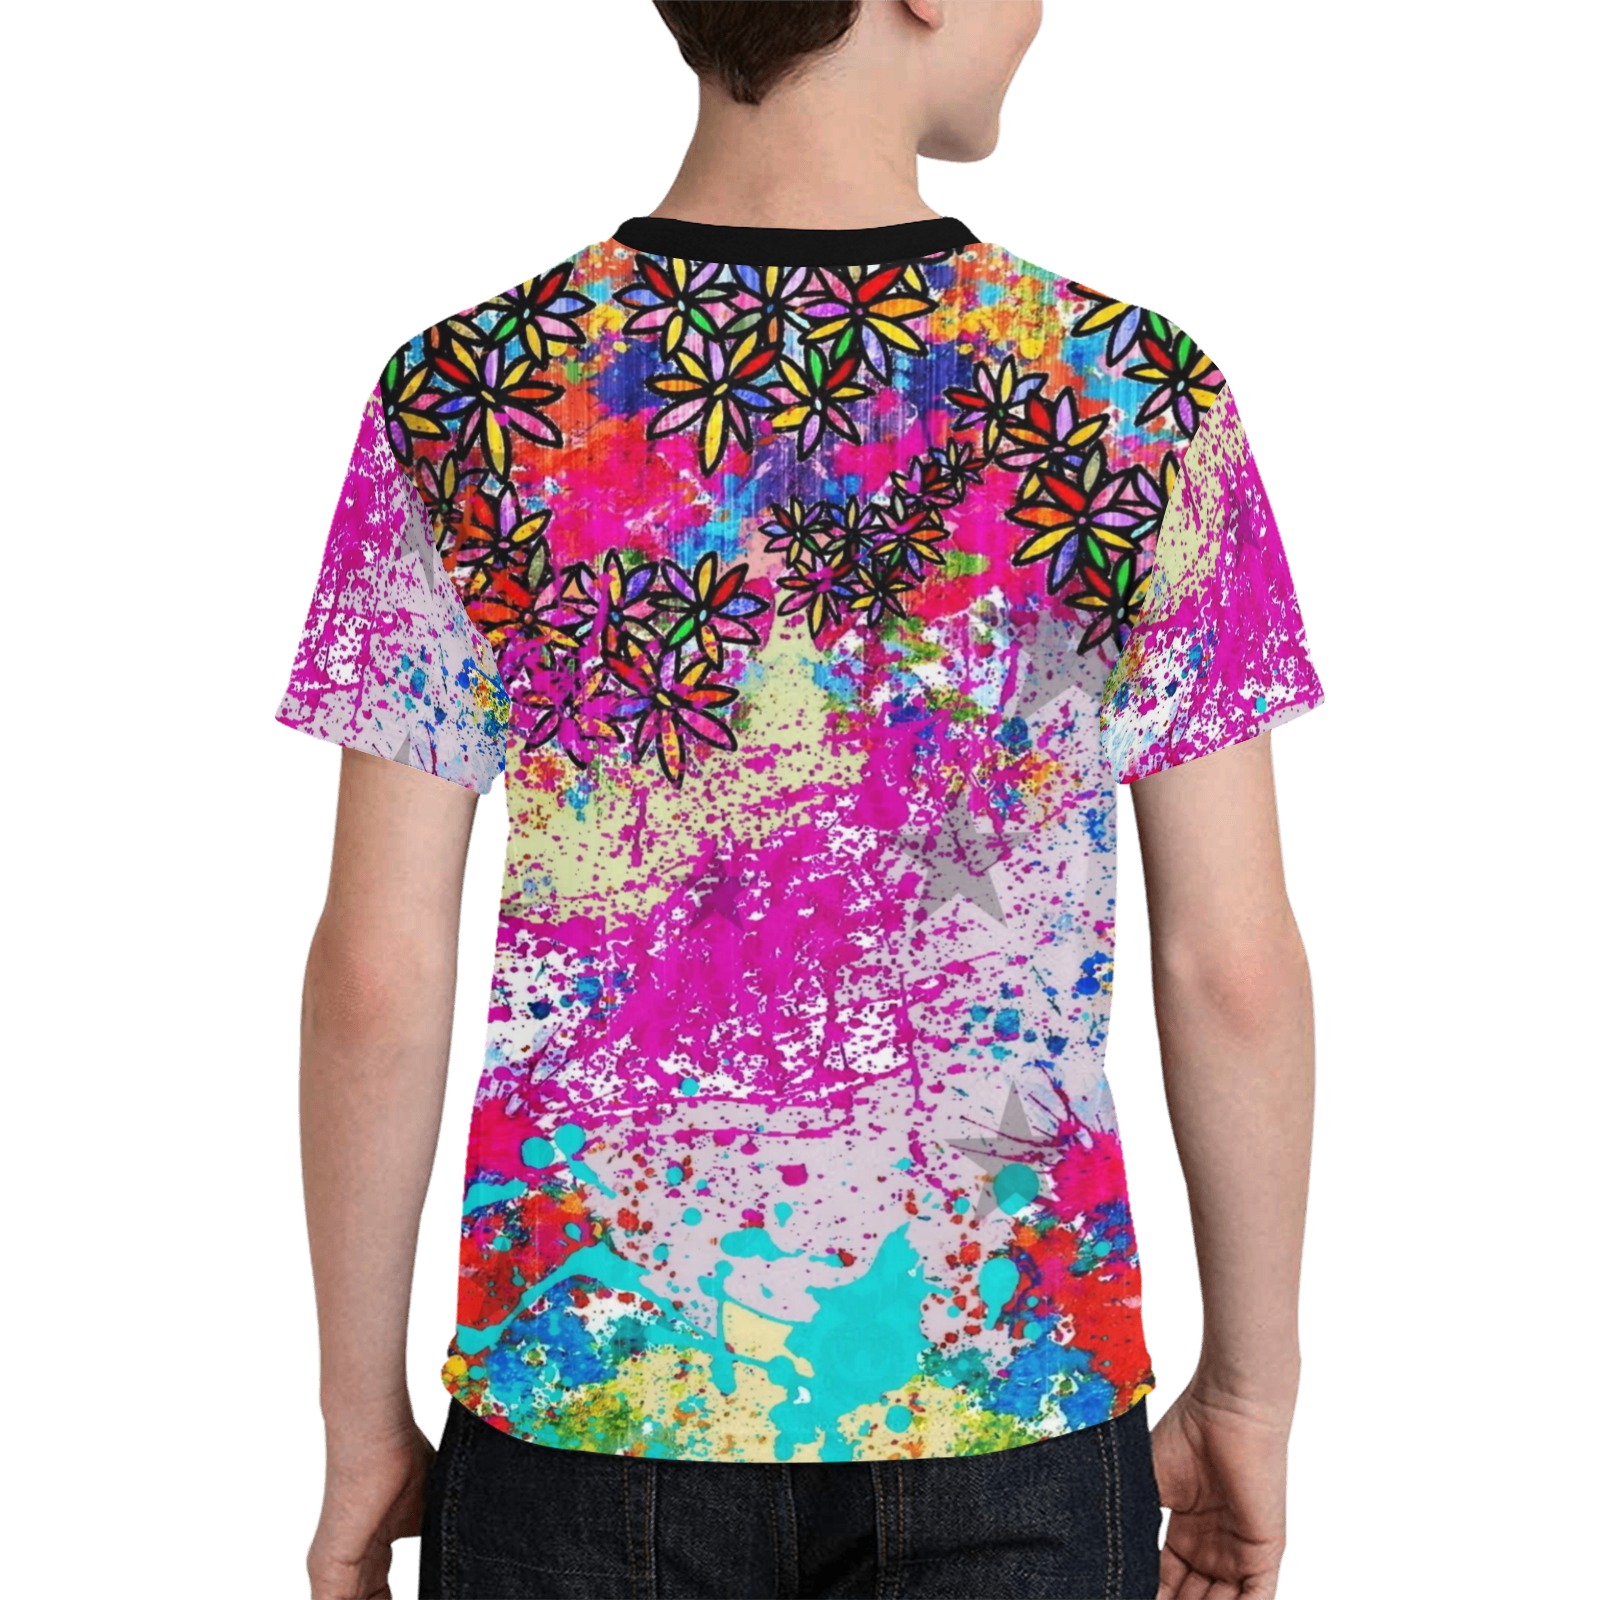 Flower Spring by Nico Bielow Kids' All Over Print T-shirt (Model T65)